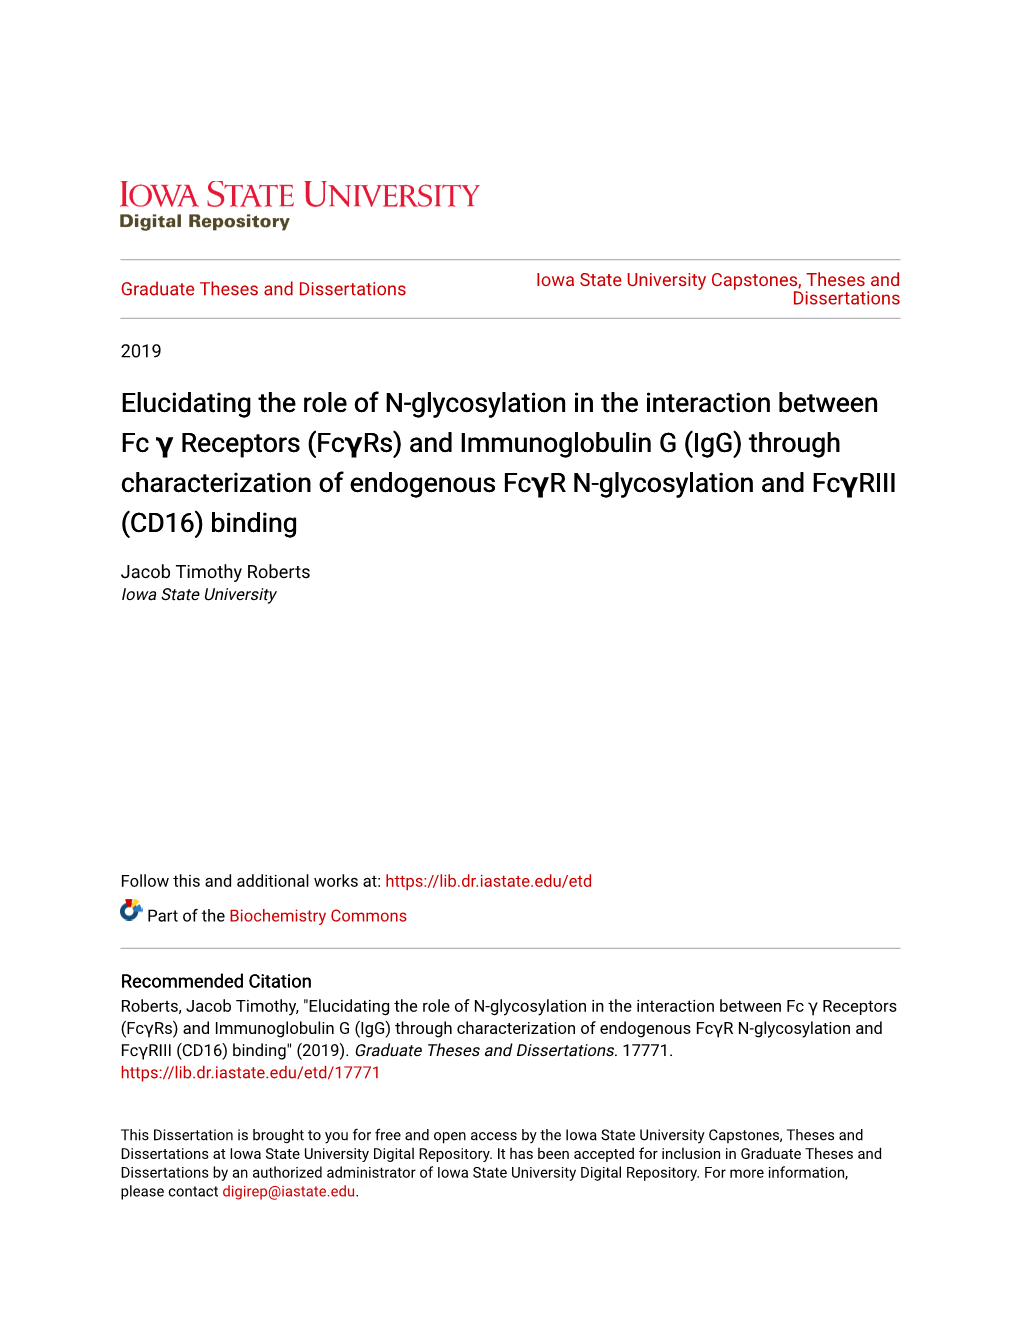 Elucidating the Role of N-Glycosylation in the Interaction Between Fc Γ